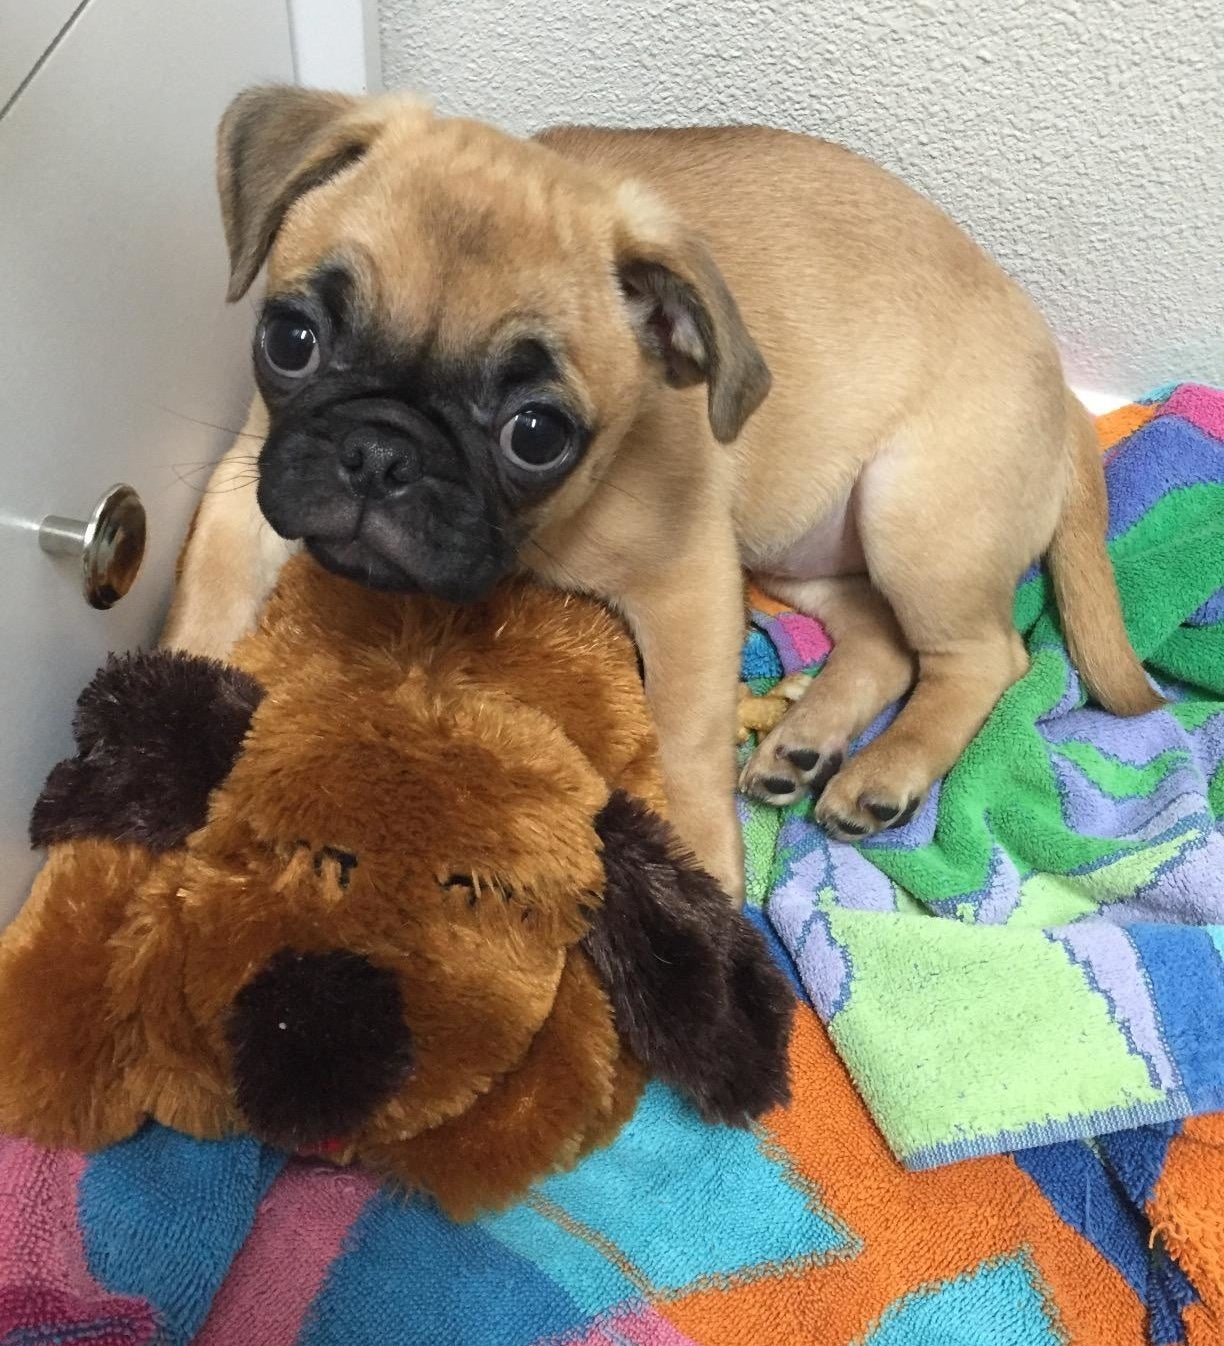 Reviewer image of pug puppy on top of plush dog toy